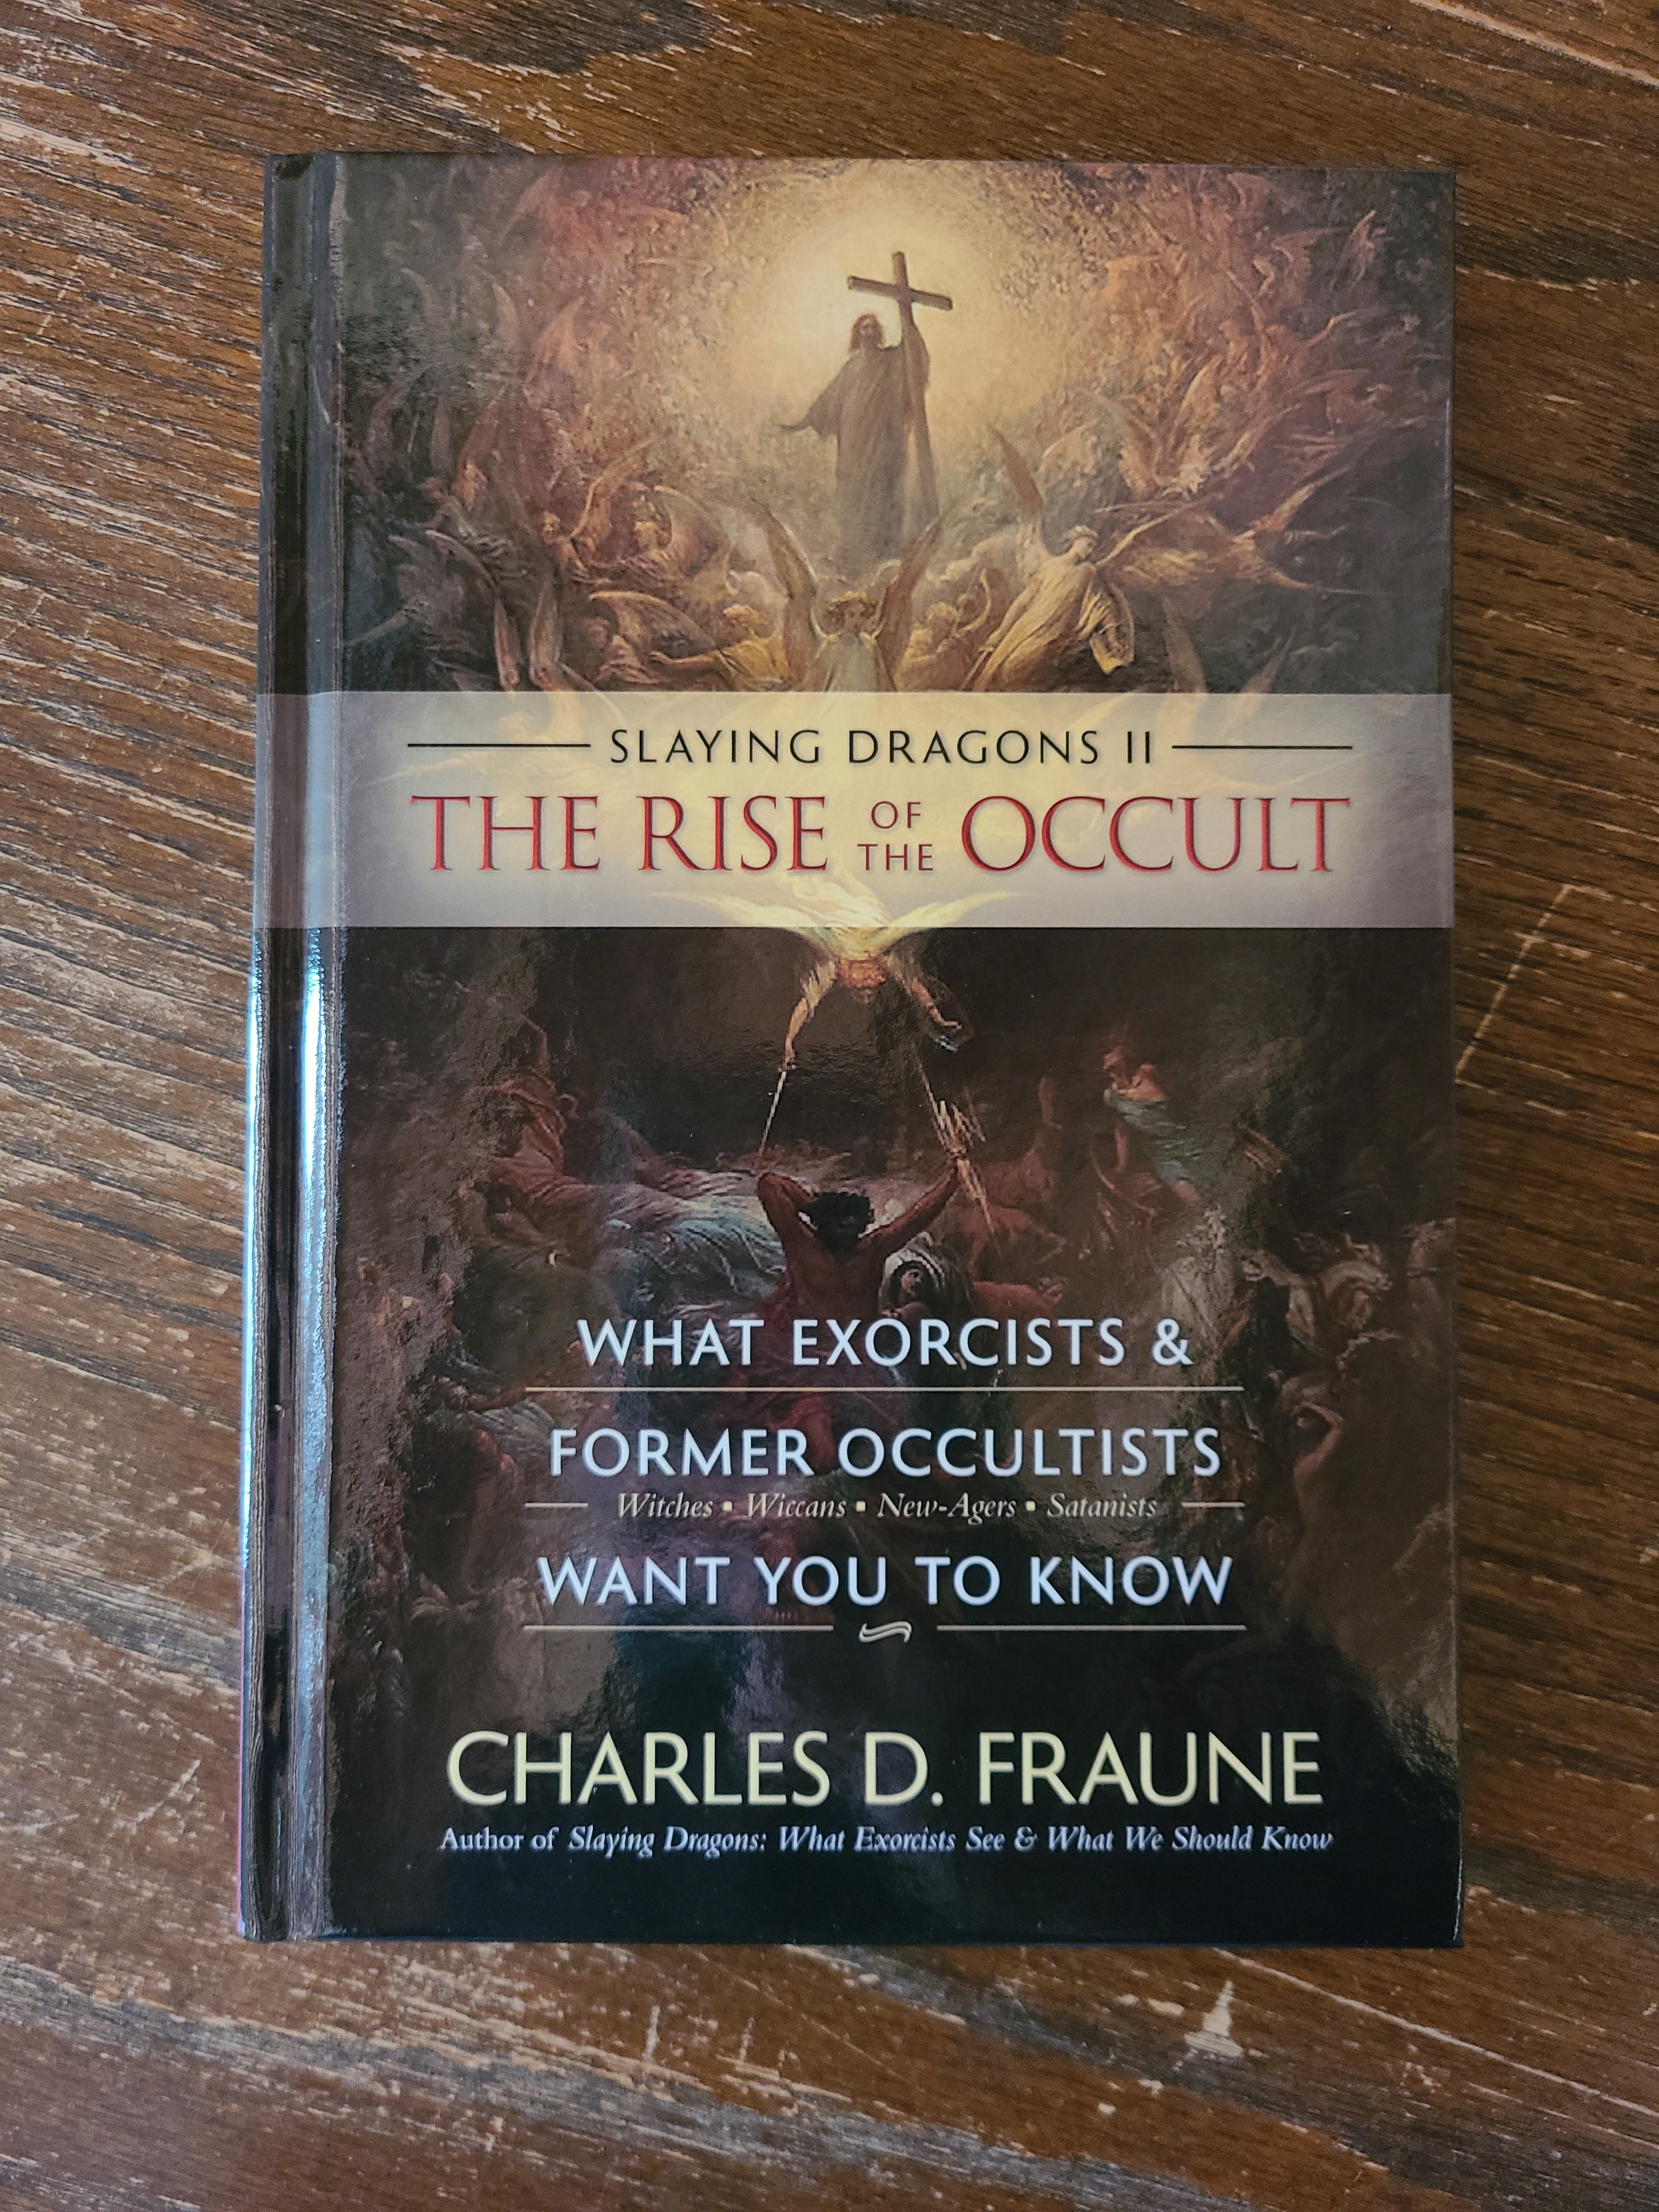 The Rise of the Occult: What Exorcists and Former Occultists Want You to Know